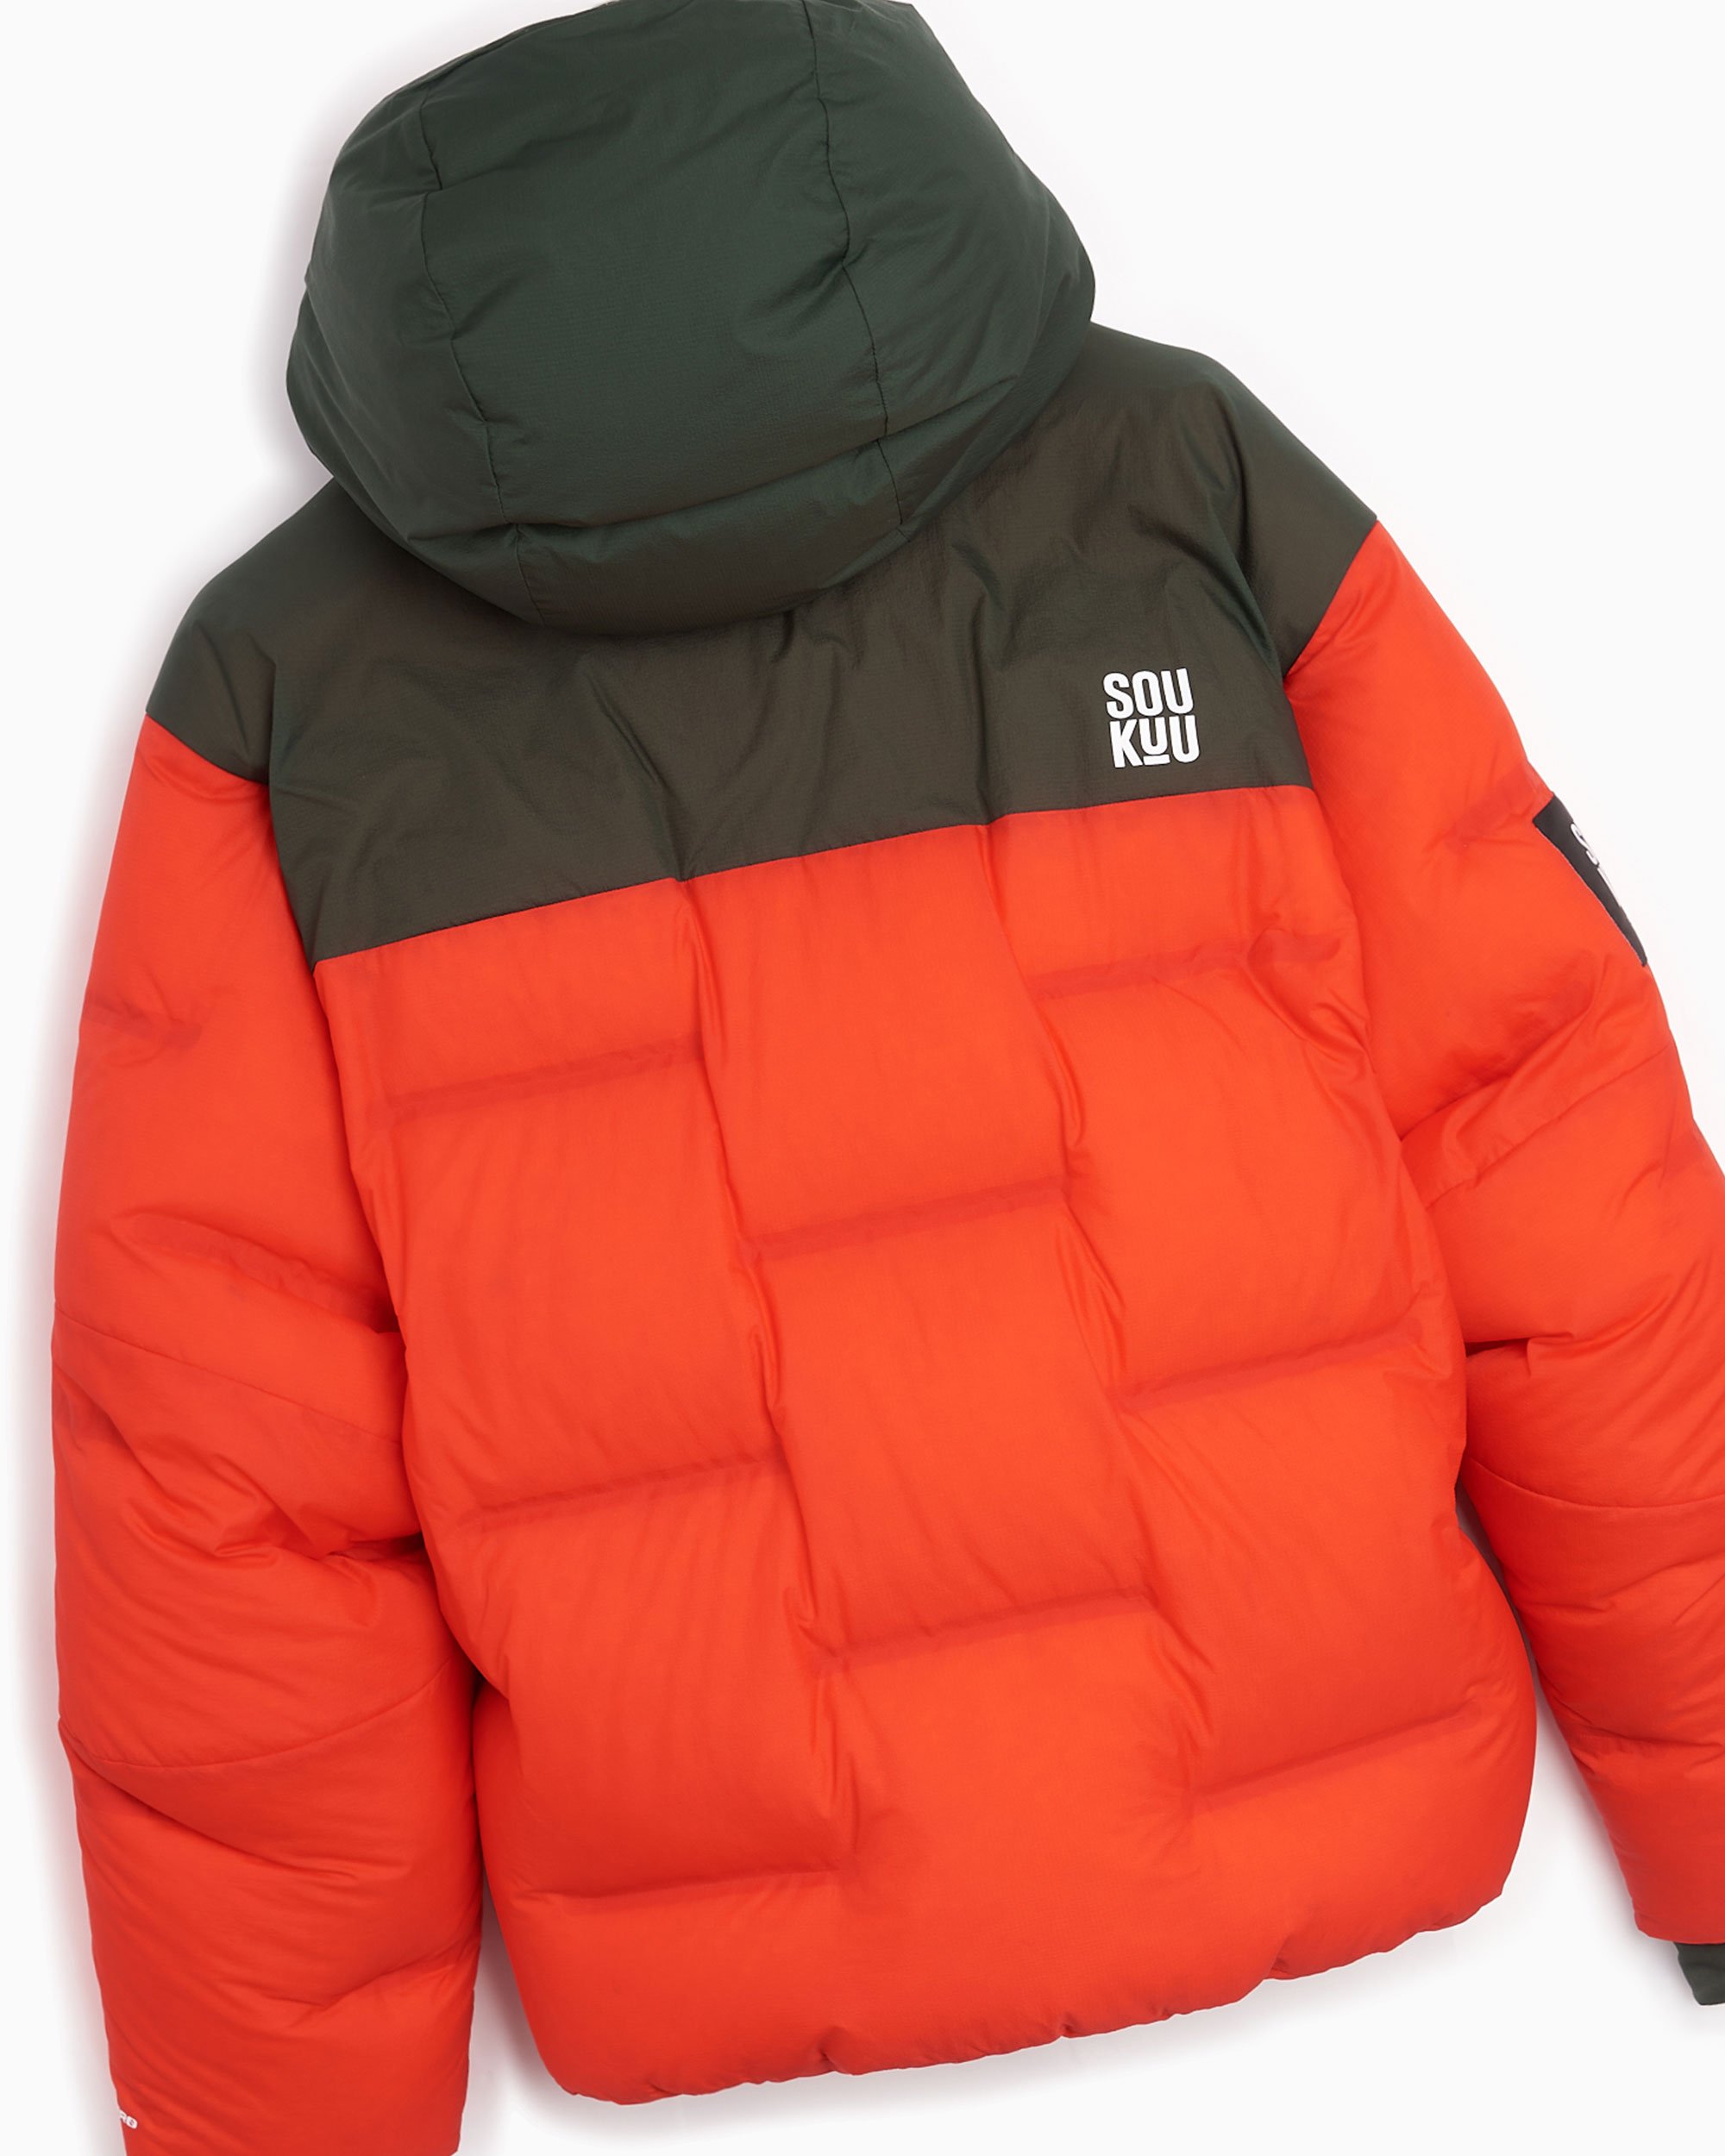 The North Face x Undercover Soukuu Cd Nuptse Men's Jacket Red 